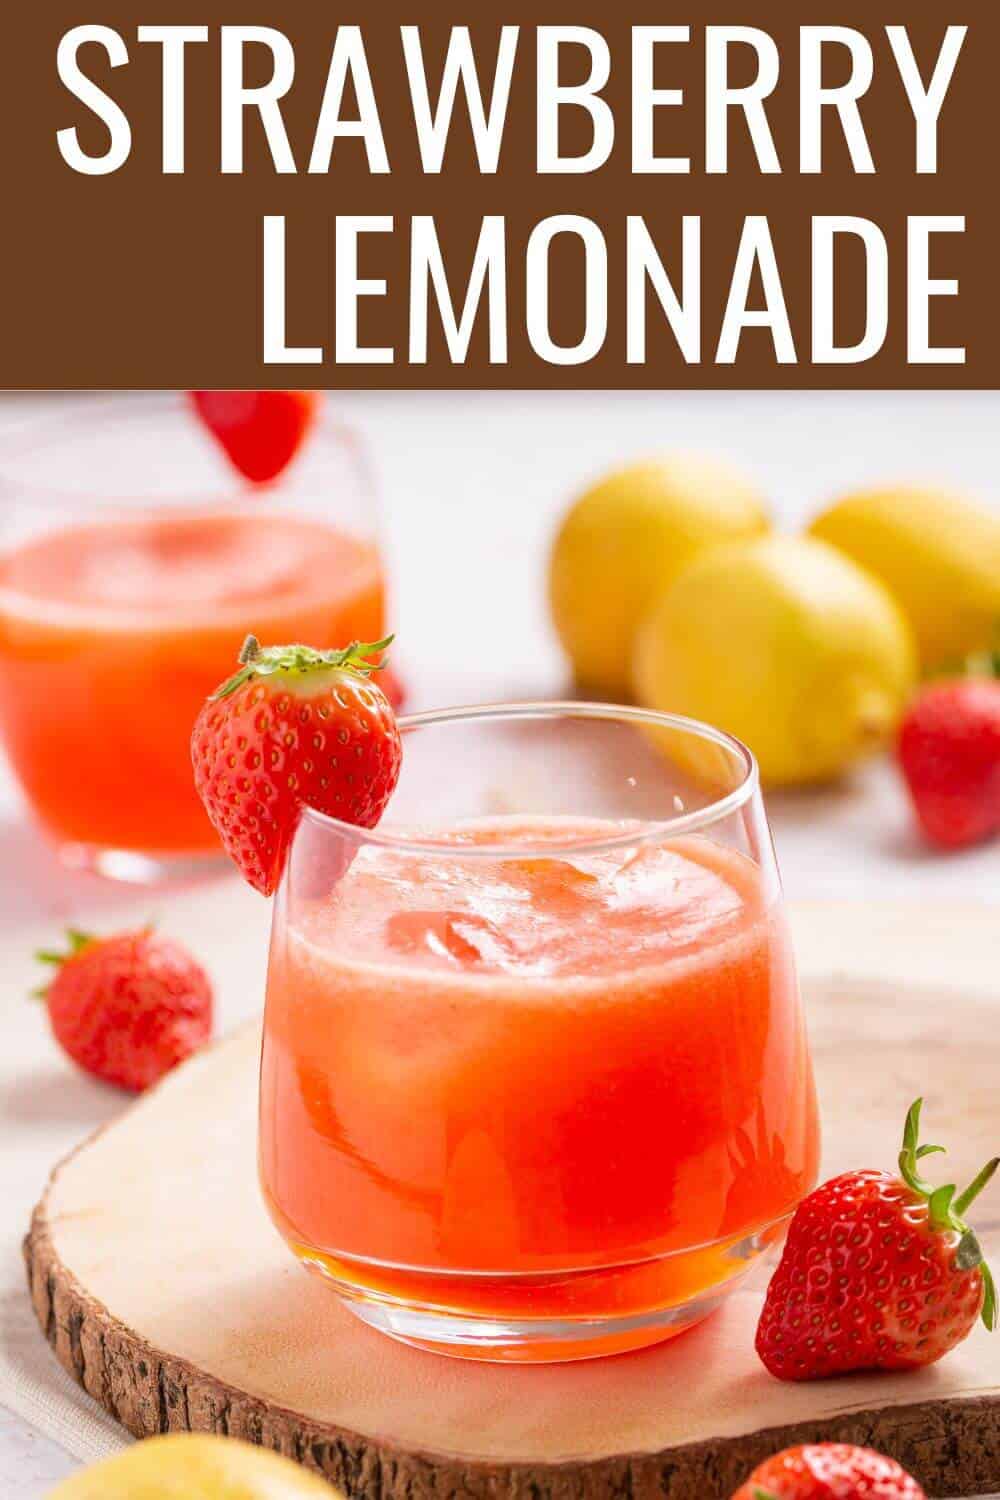 Strawberry lemonade with title text overlay.